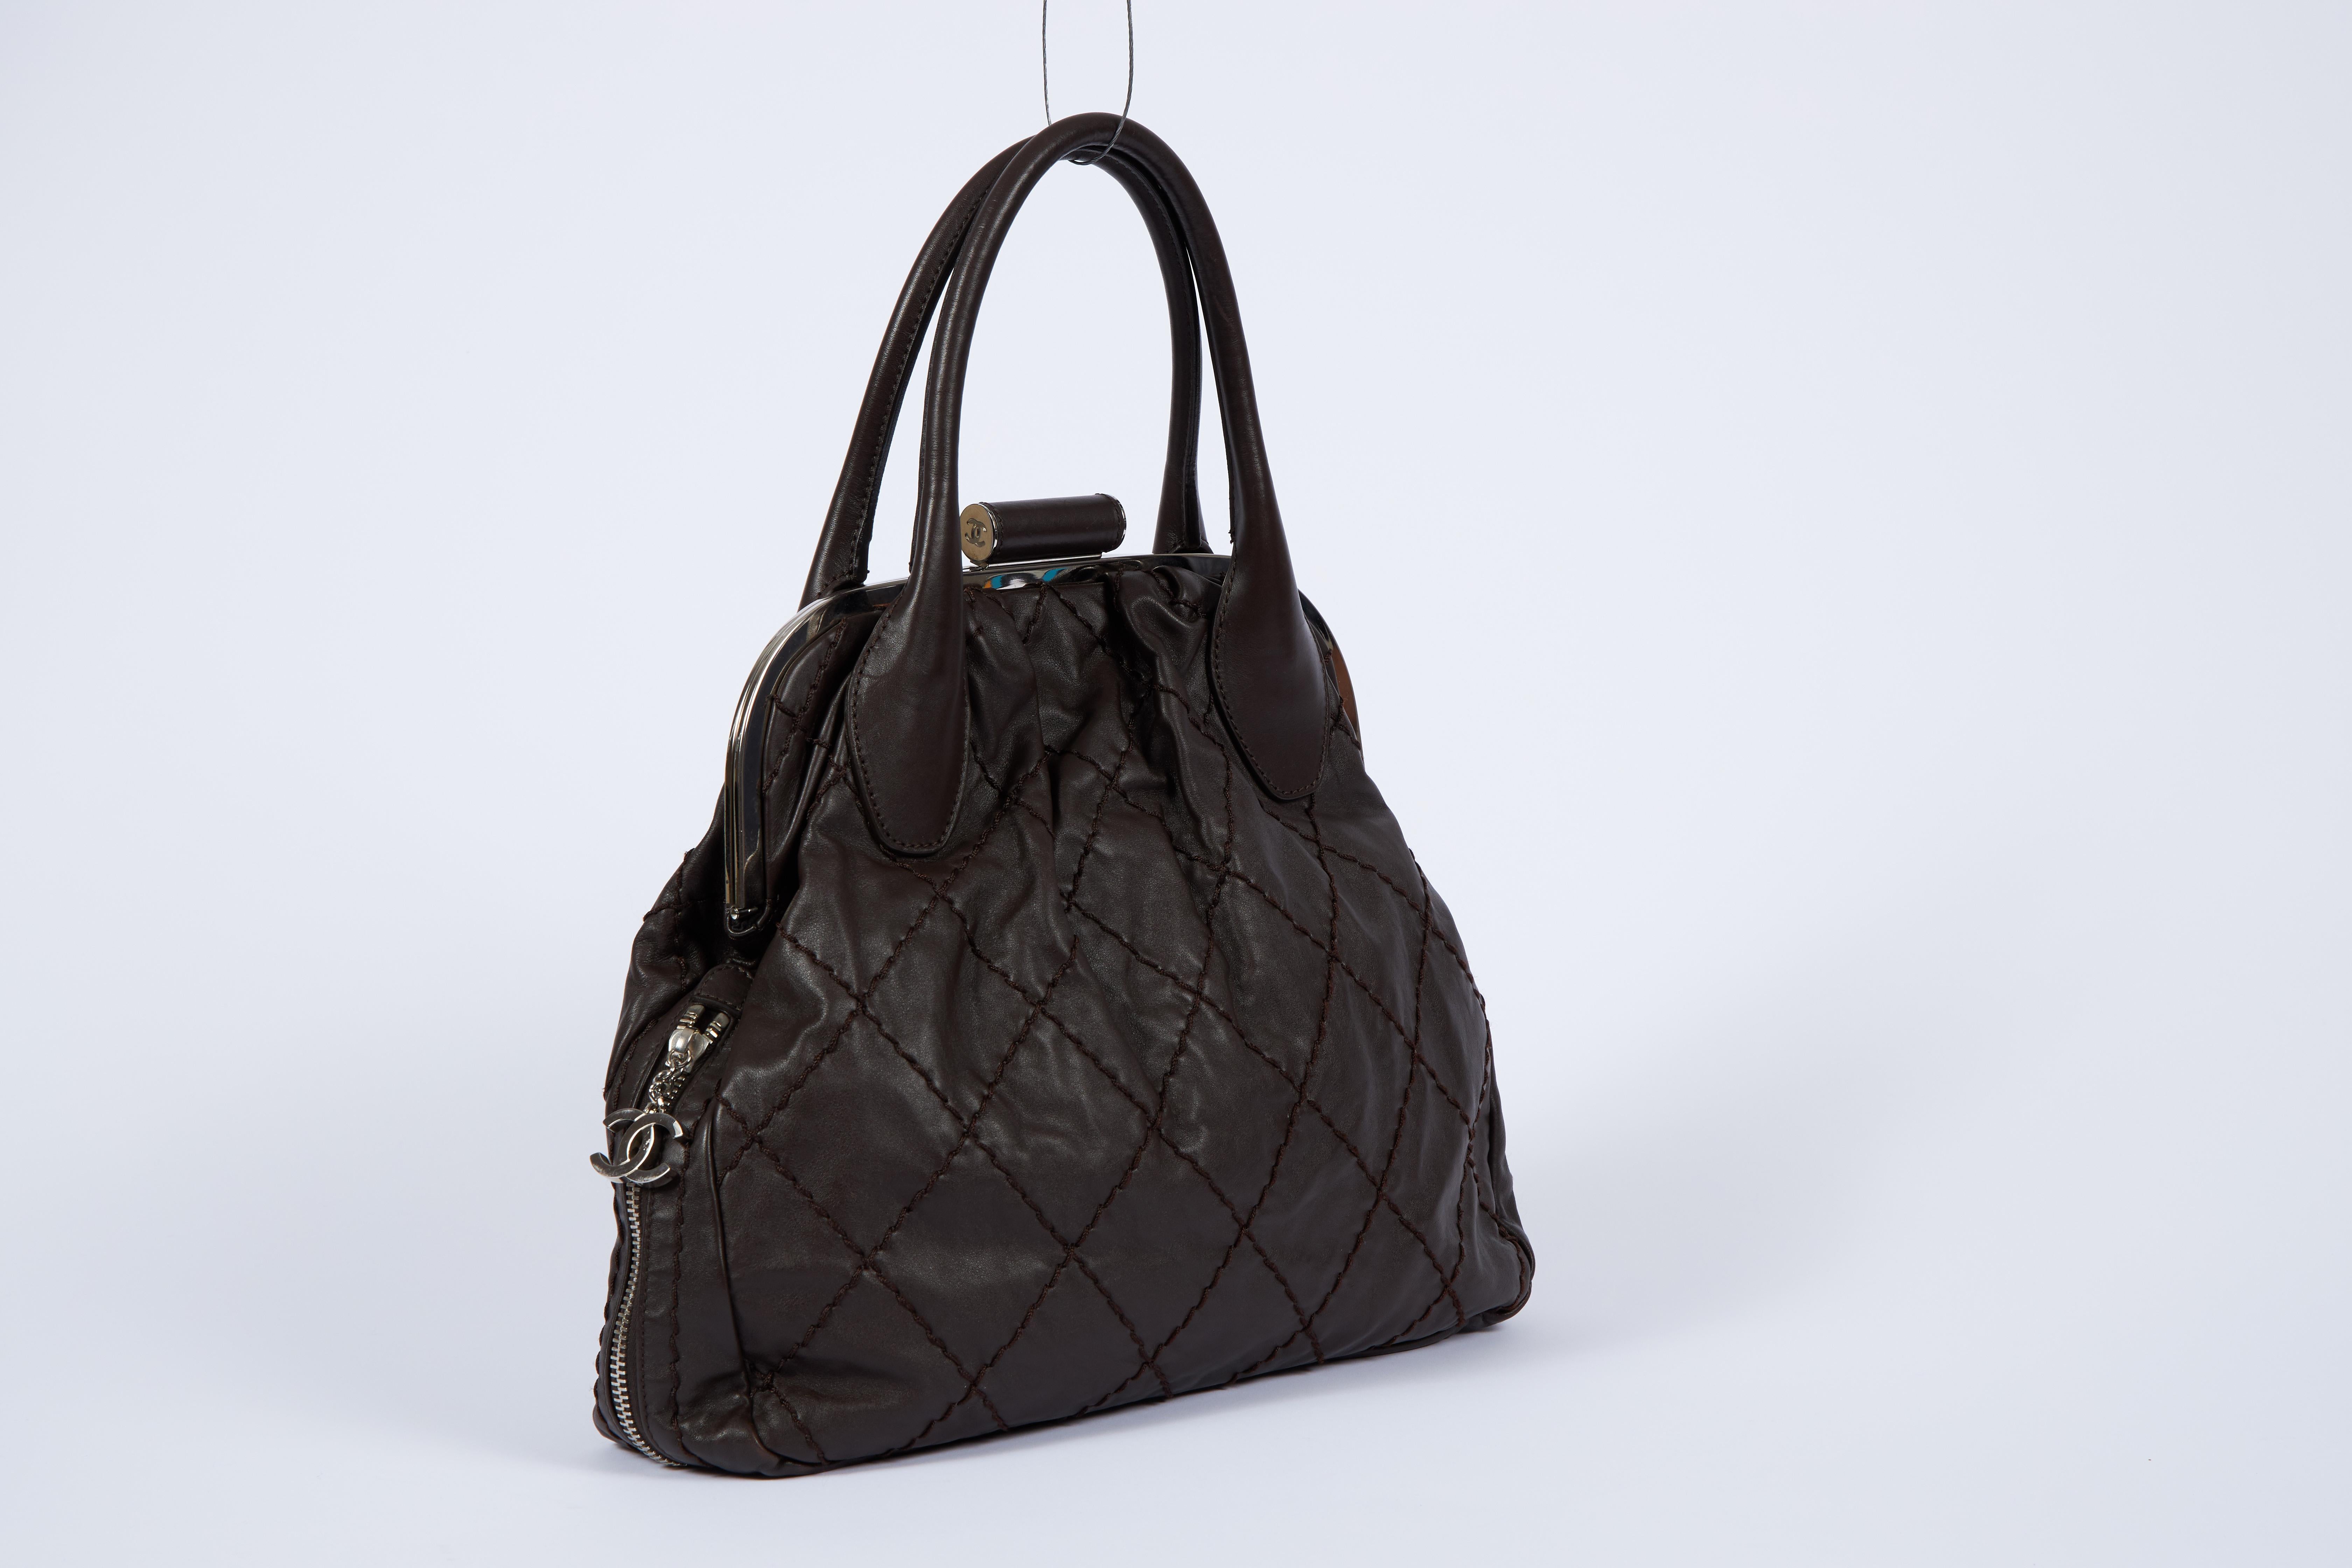 Chanel brown quilted expandable lambskin tote. Handle drop 7